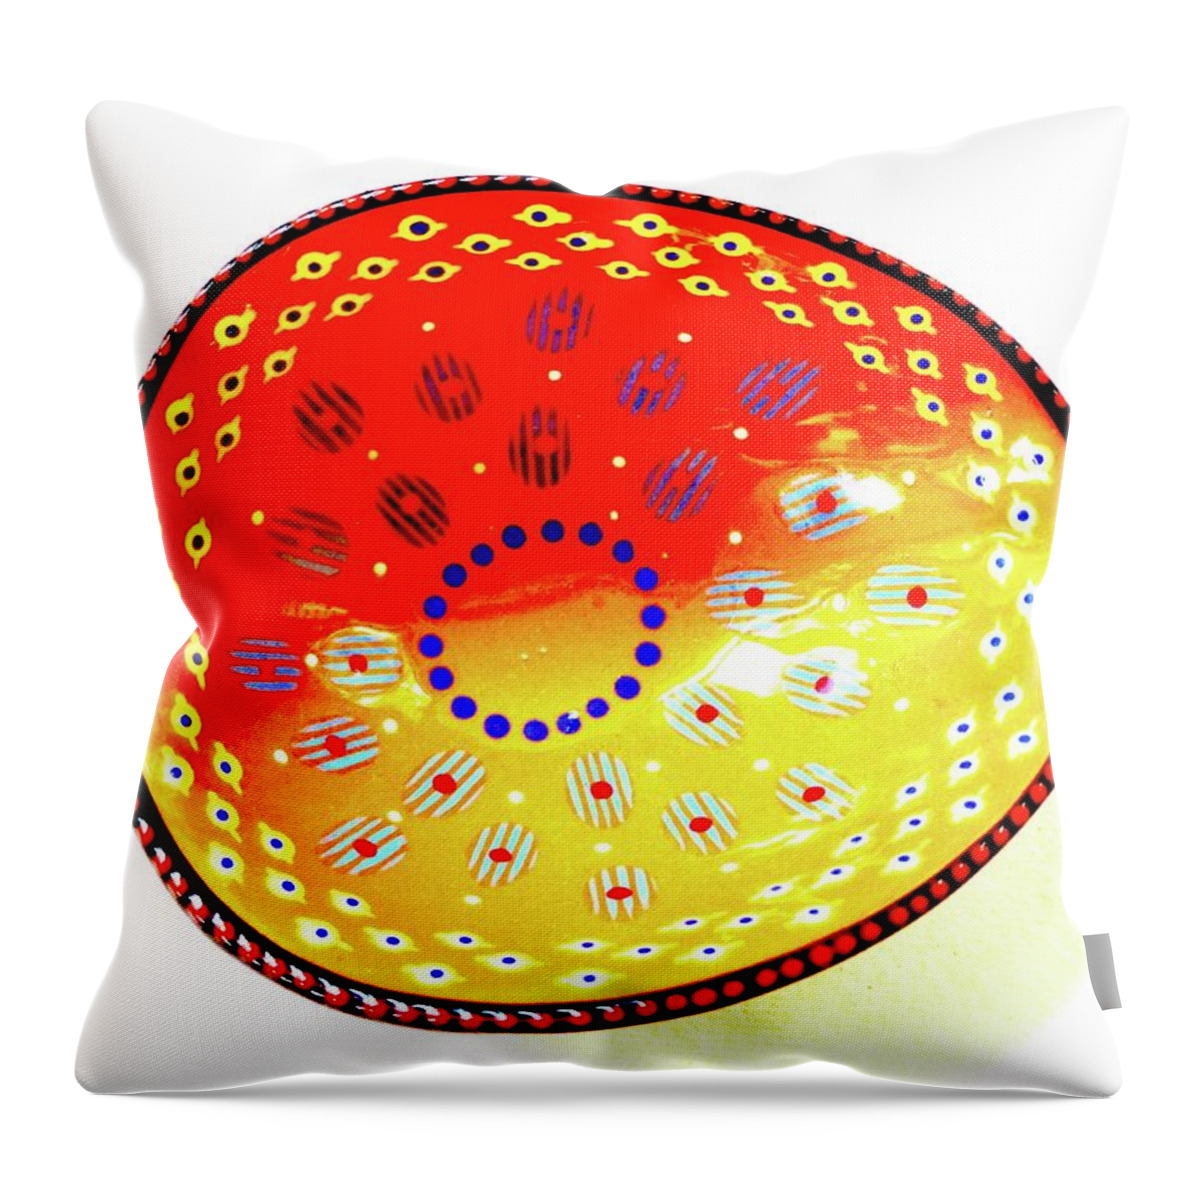 Ceramic Throw Pillow featuring the photograph Bowl Of Circles by Alida M Haslett